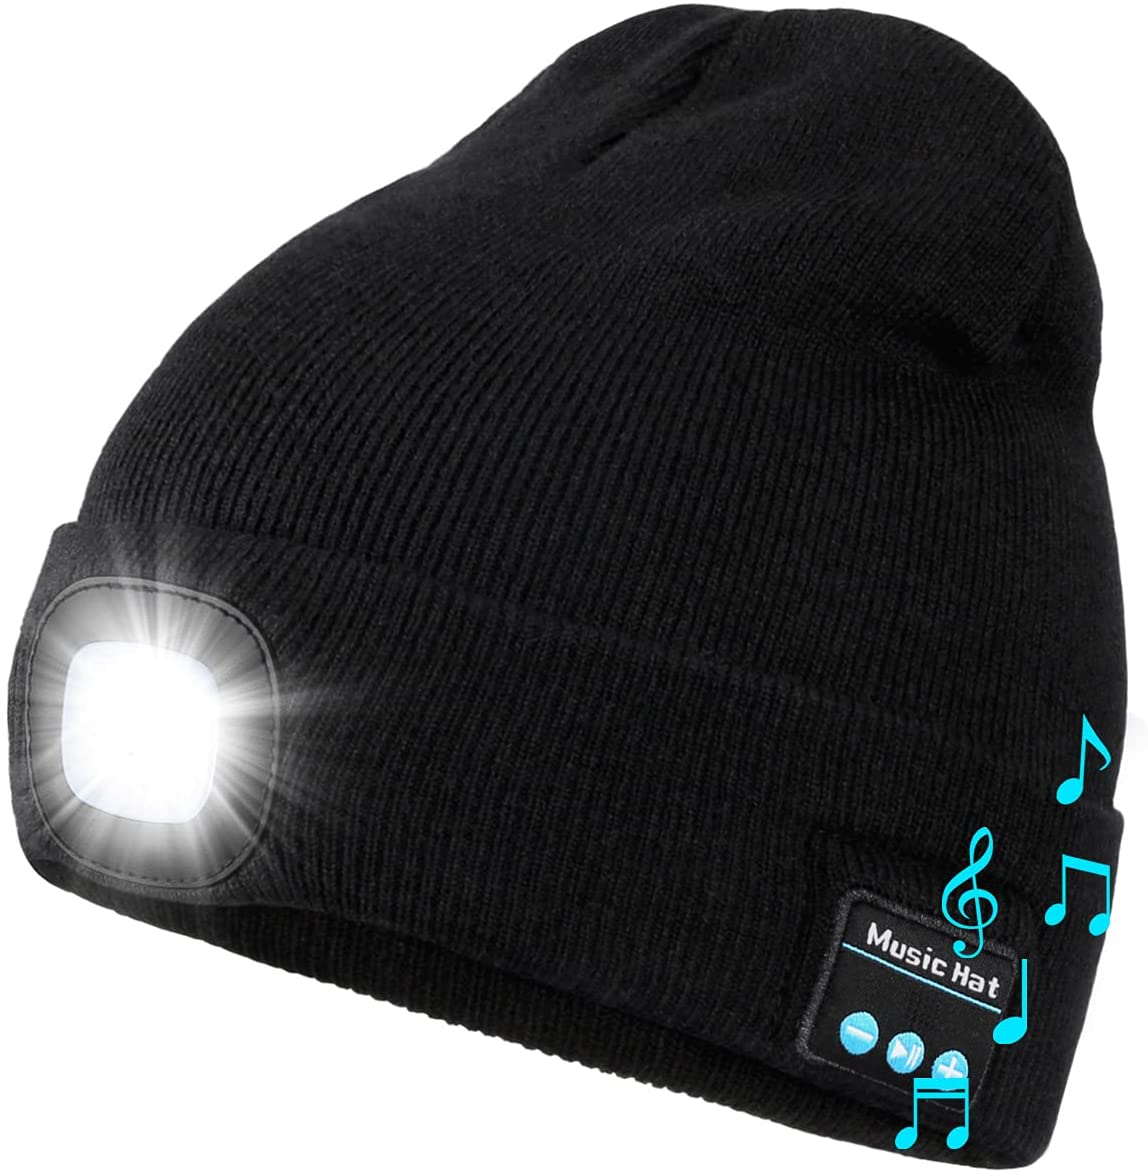 Bluetooth Beanie Hat with Light, Speakers & Mic - LINWEY - Best Bluetooth Beanie Hat with Light, Speakers & Mic